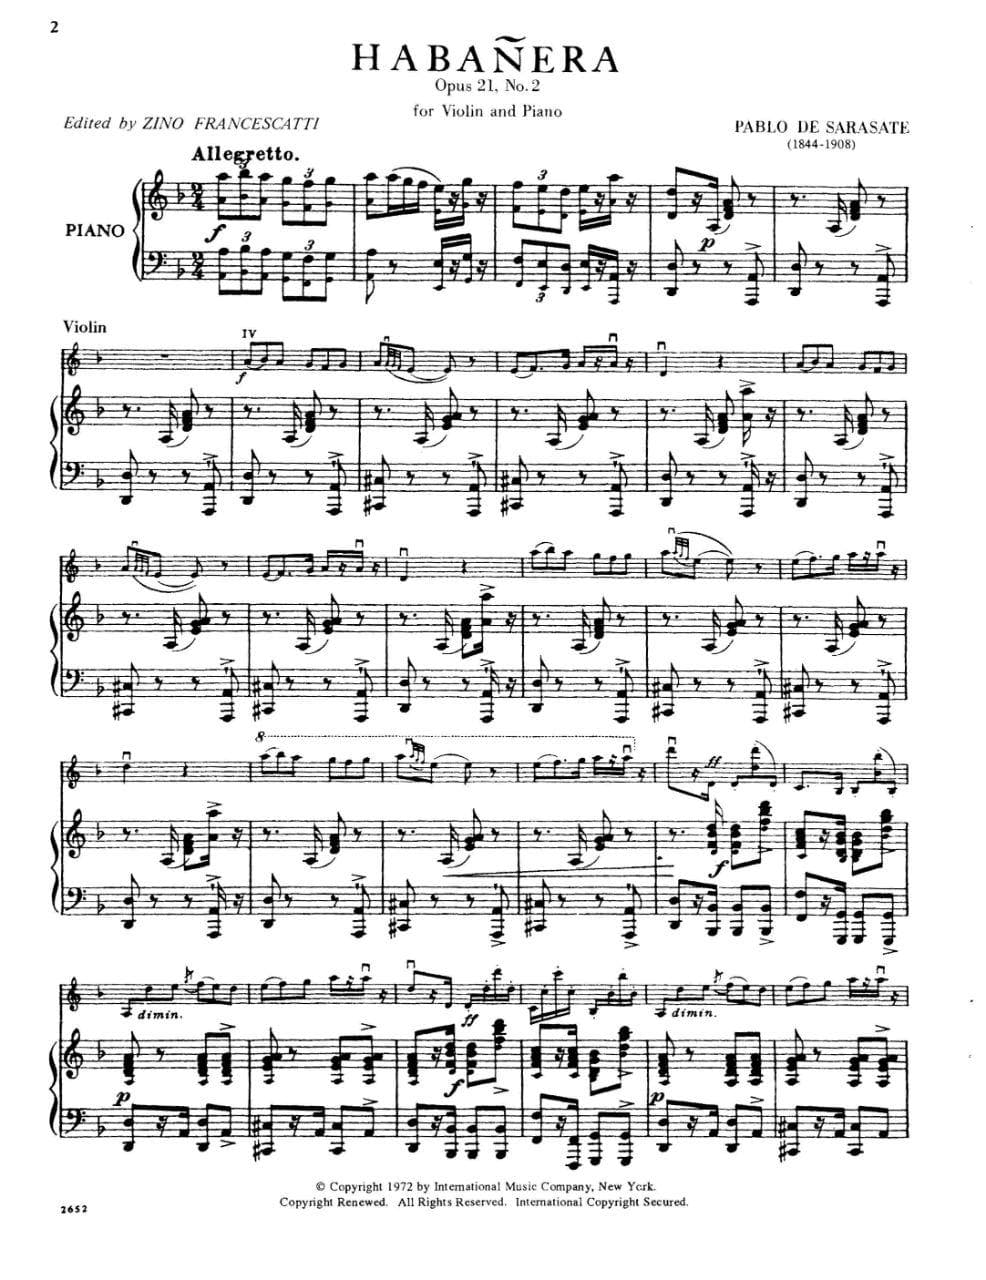 Sarasate, Pablo - Habanera Op 21 No 2 For Violin and Piano Published by International Music Company